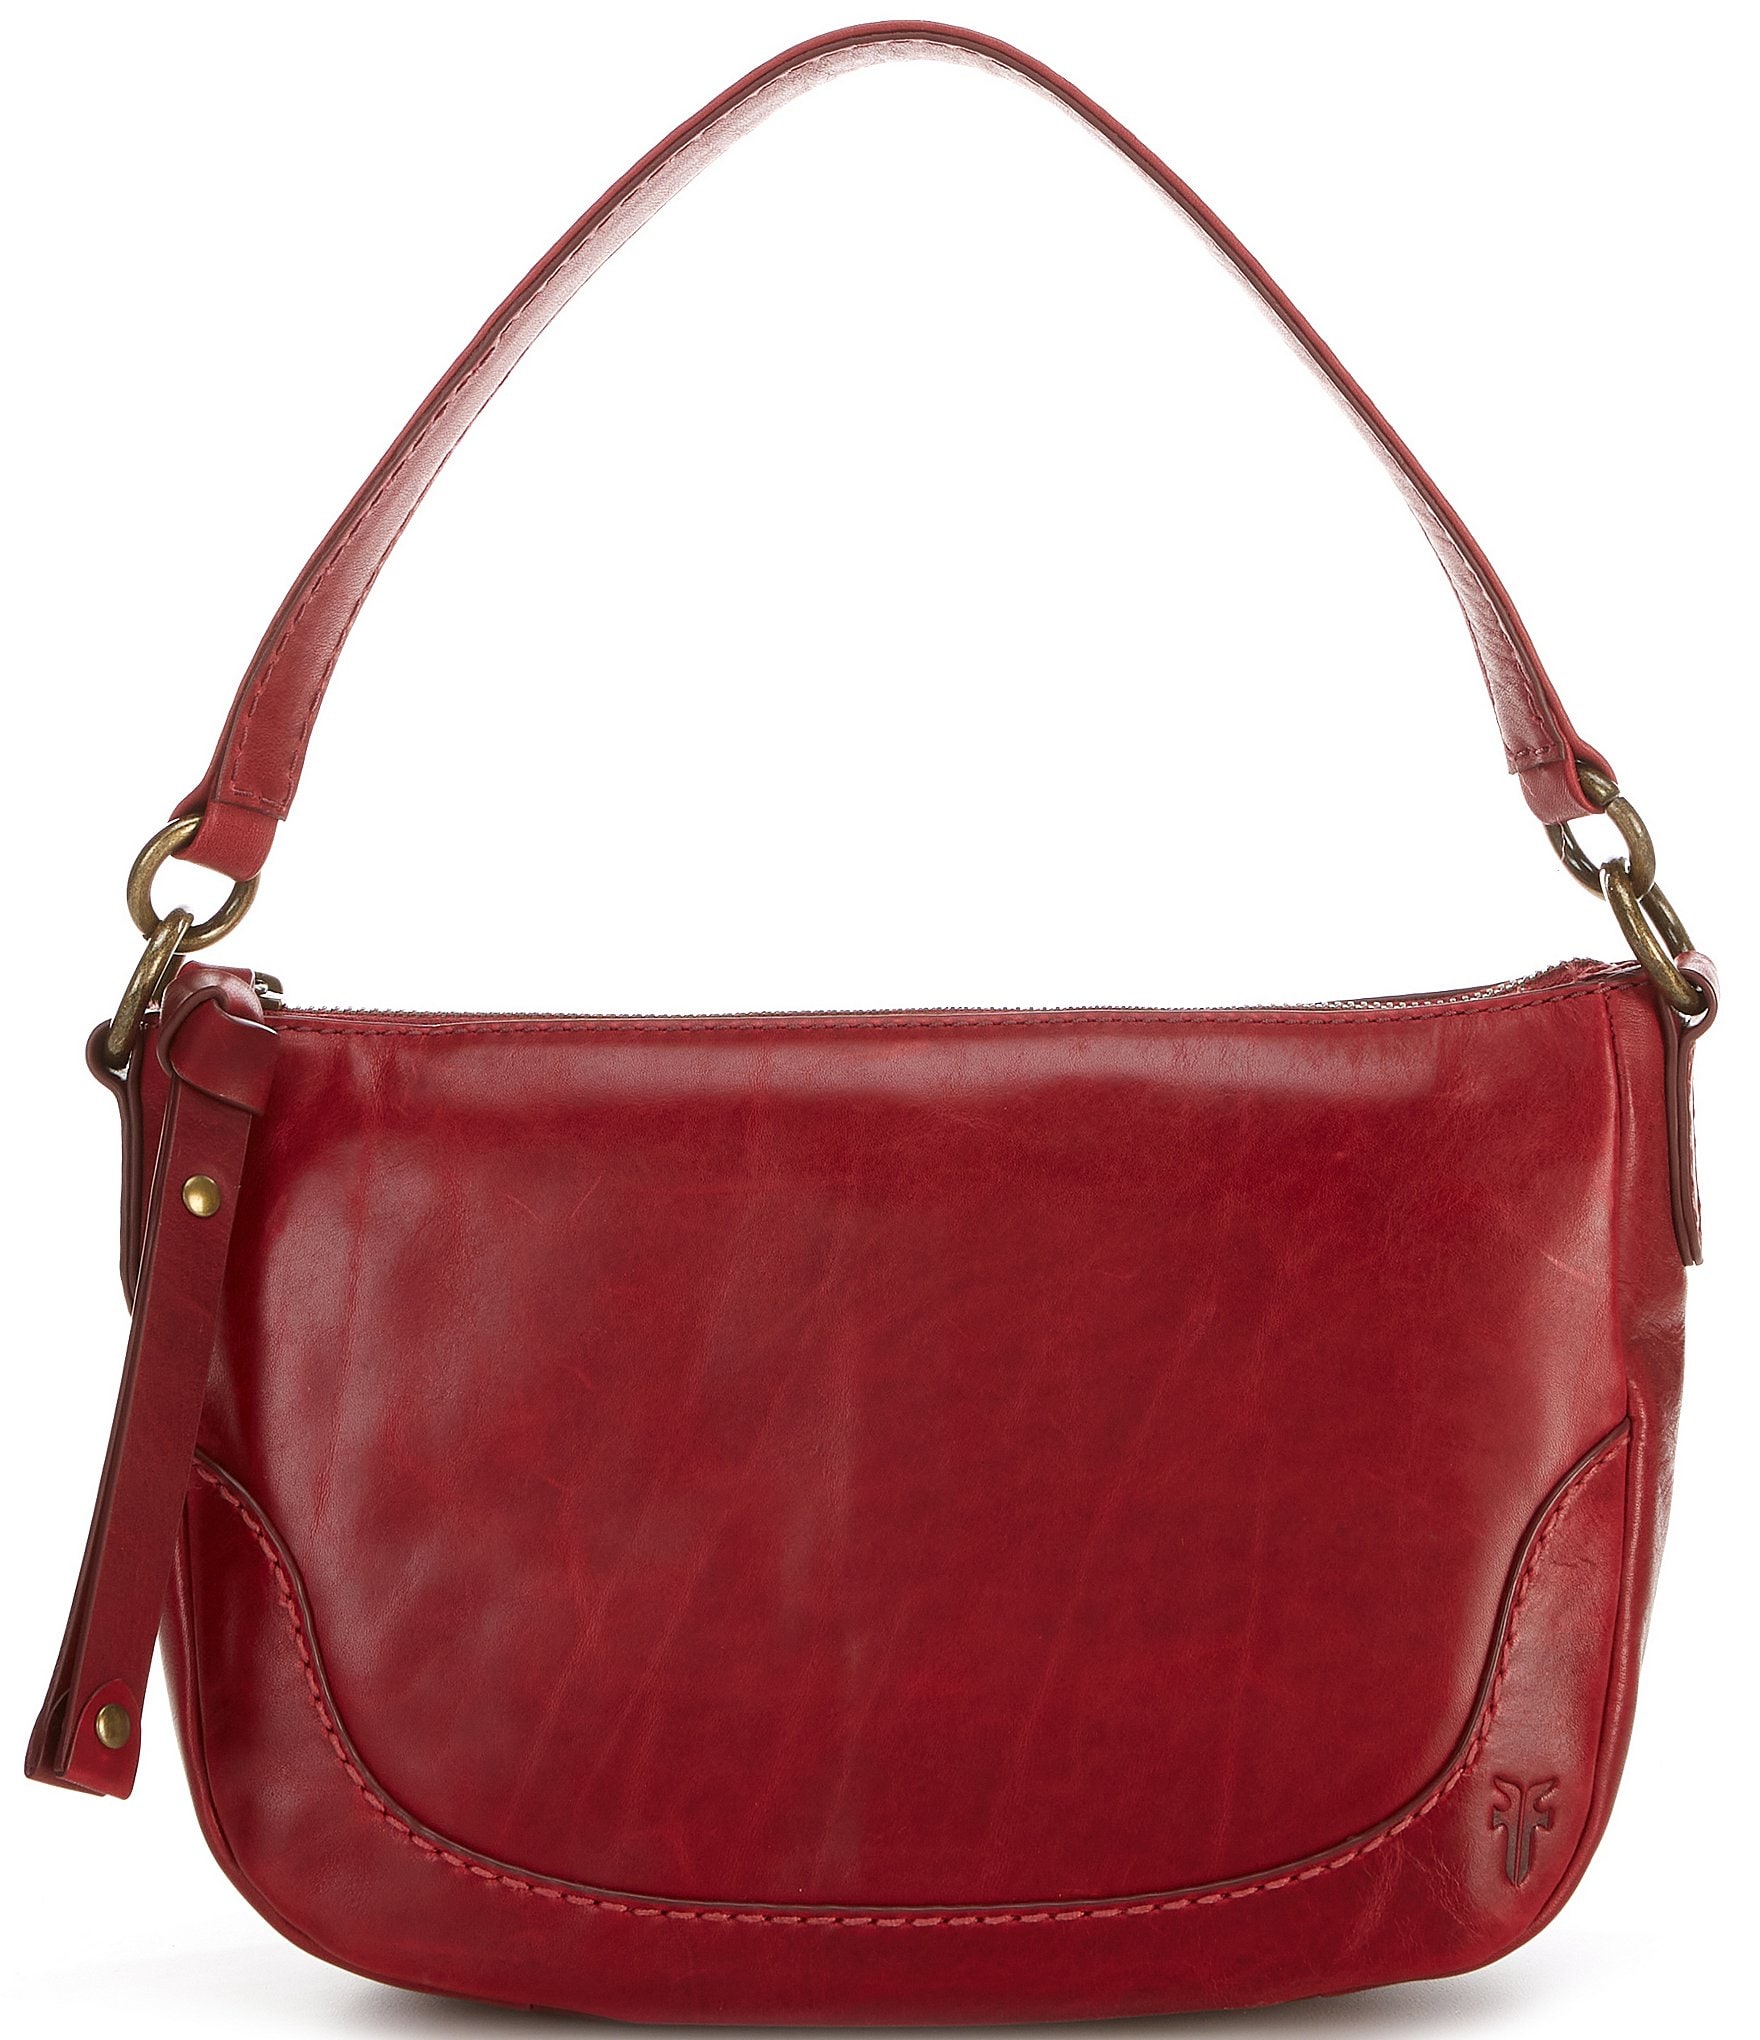 DKNY Purse Chelsea Large Tote Satchel Crossbody Burgundy with